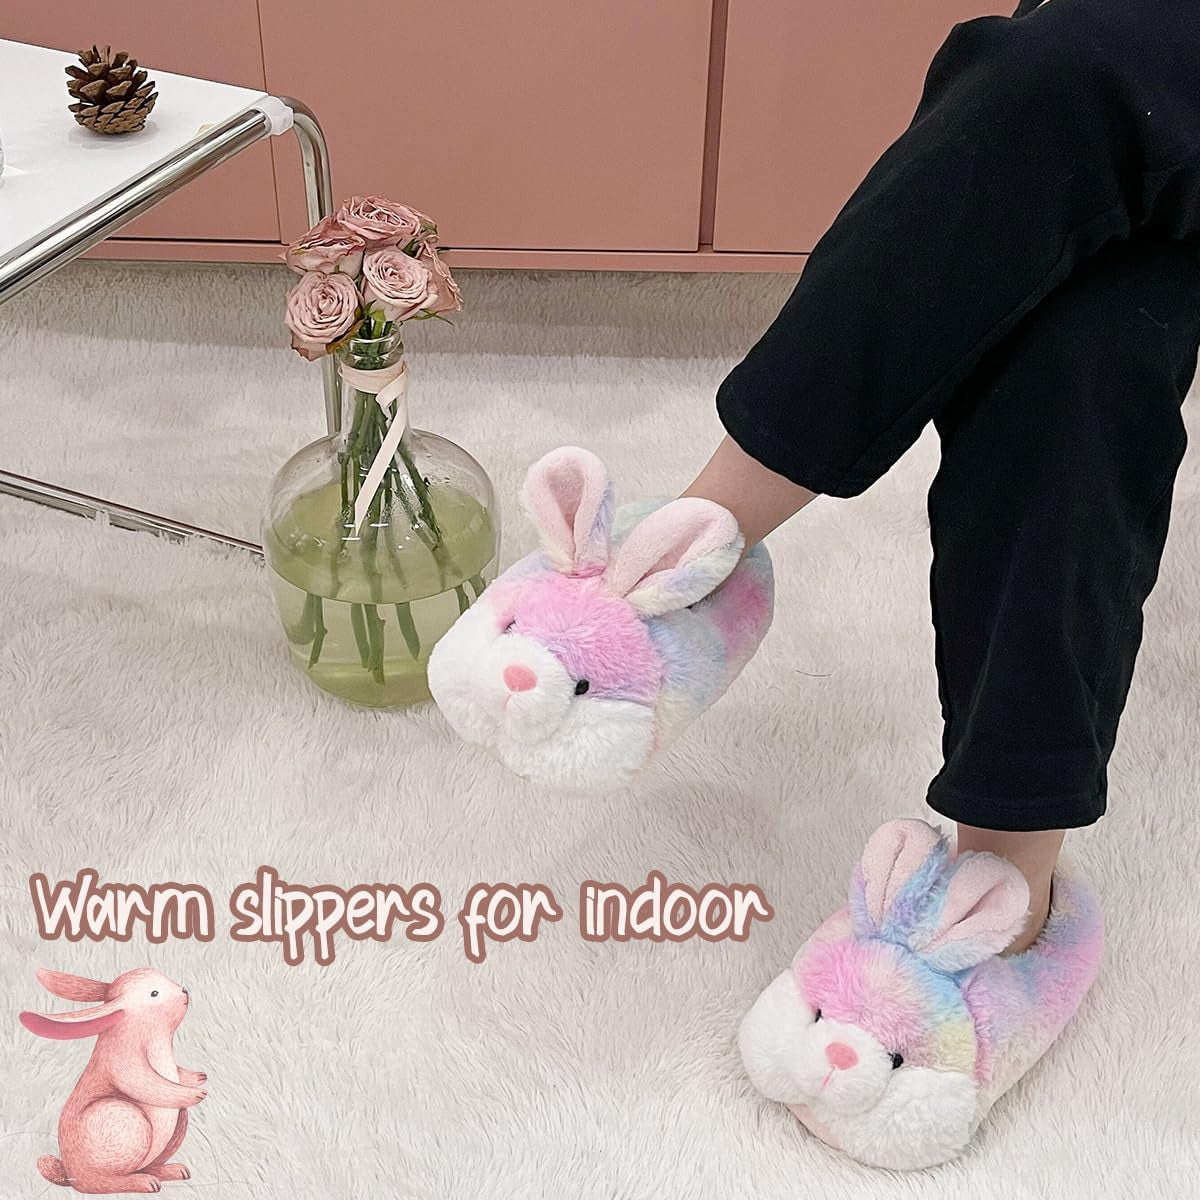 Classic Bunny Slippers for Women Funny Animal Novelty Slippers for Girls Cute Plush Rabbit Bedroom Slippers Easter Gifts